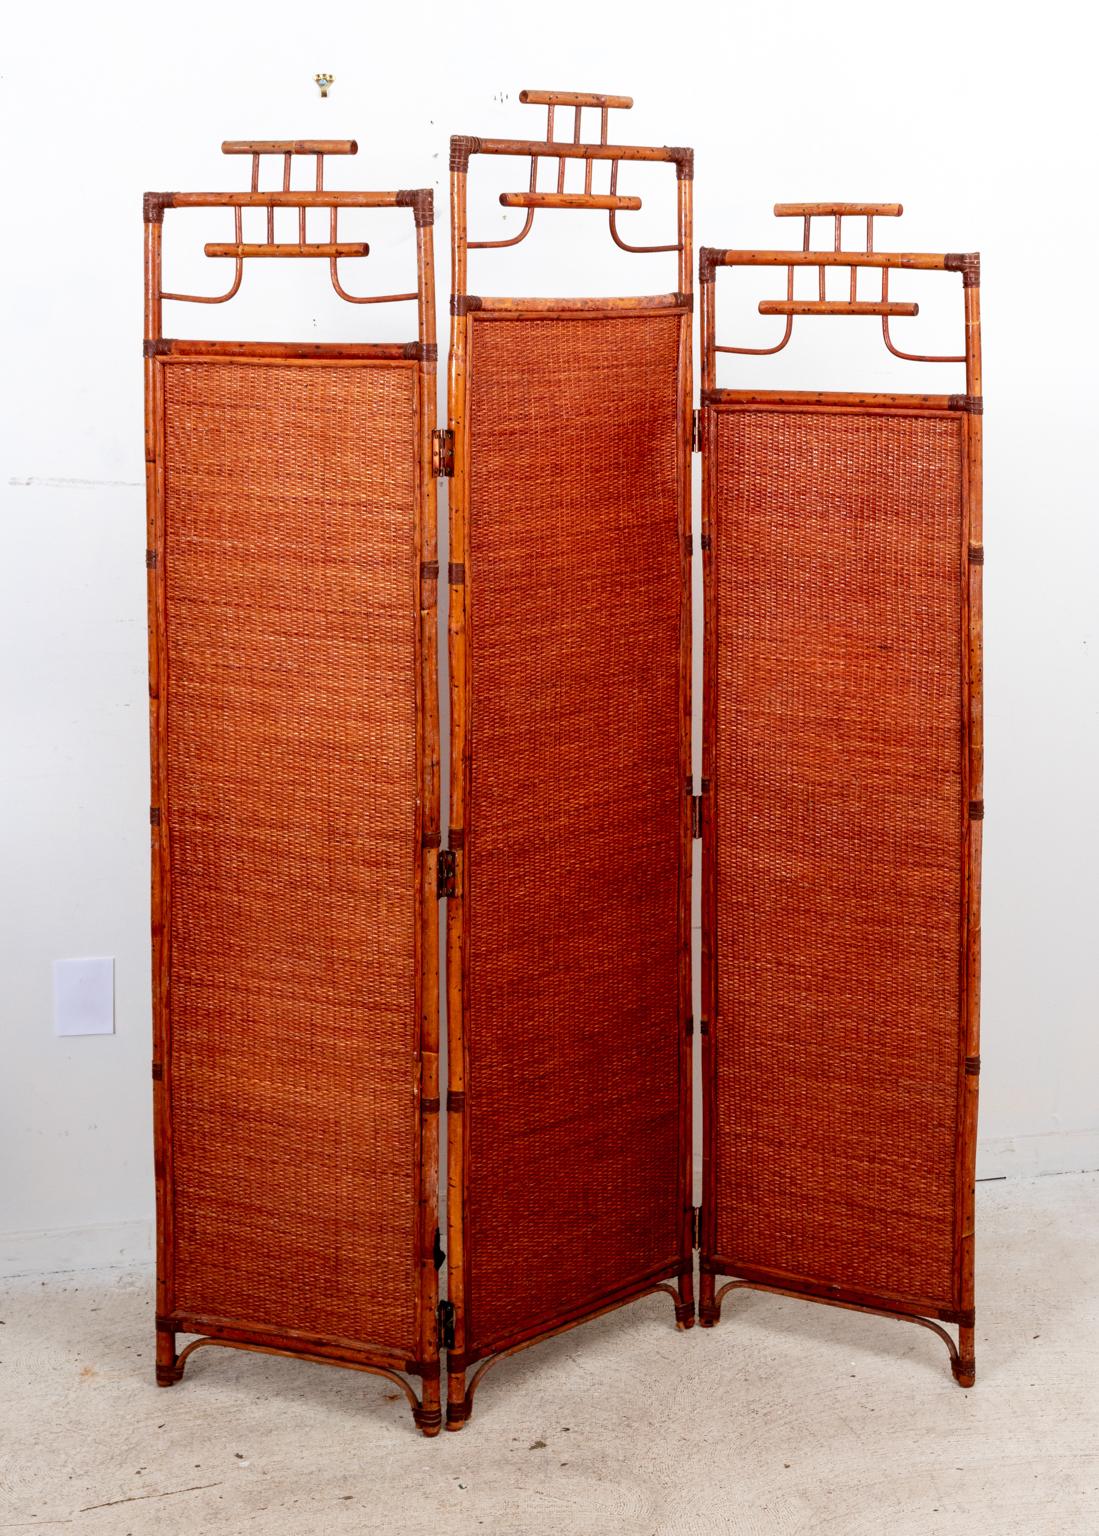 Circa 1990s three panel folding bamboo frame and rattan panel screen or room divider in the Hollywood Regency style. Please note of wear consistent with age. Good overall condition.